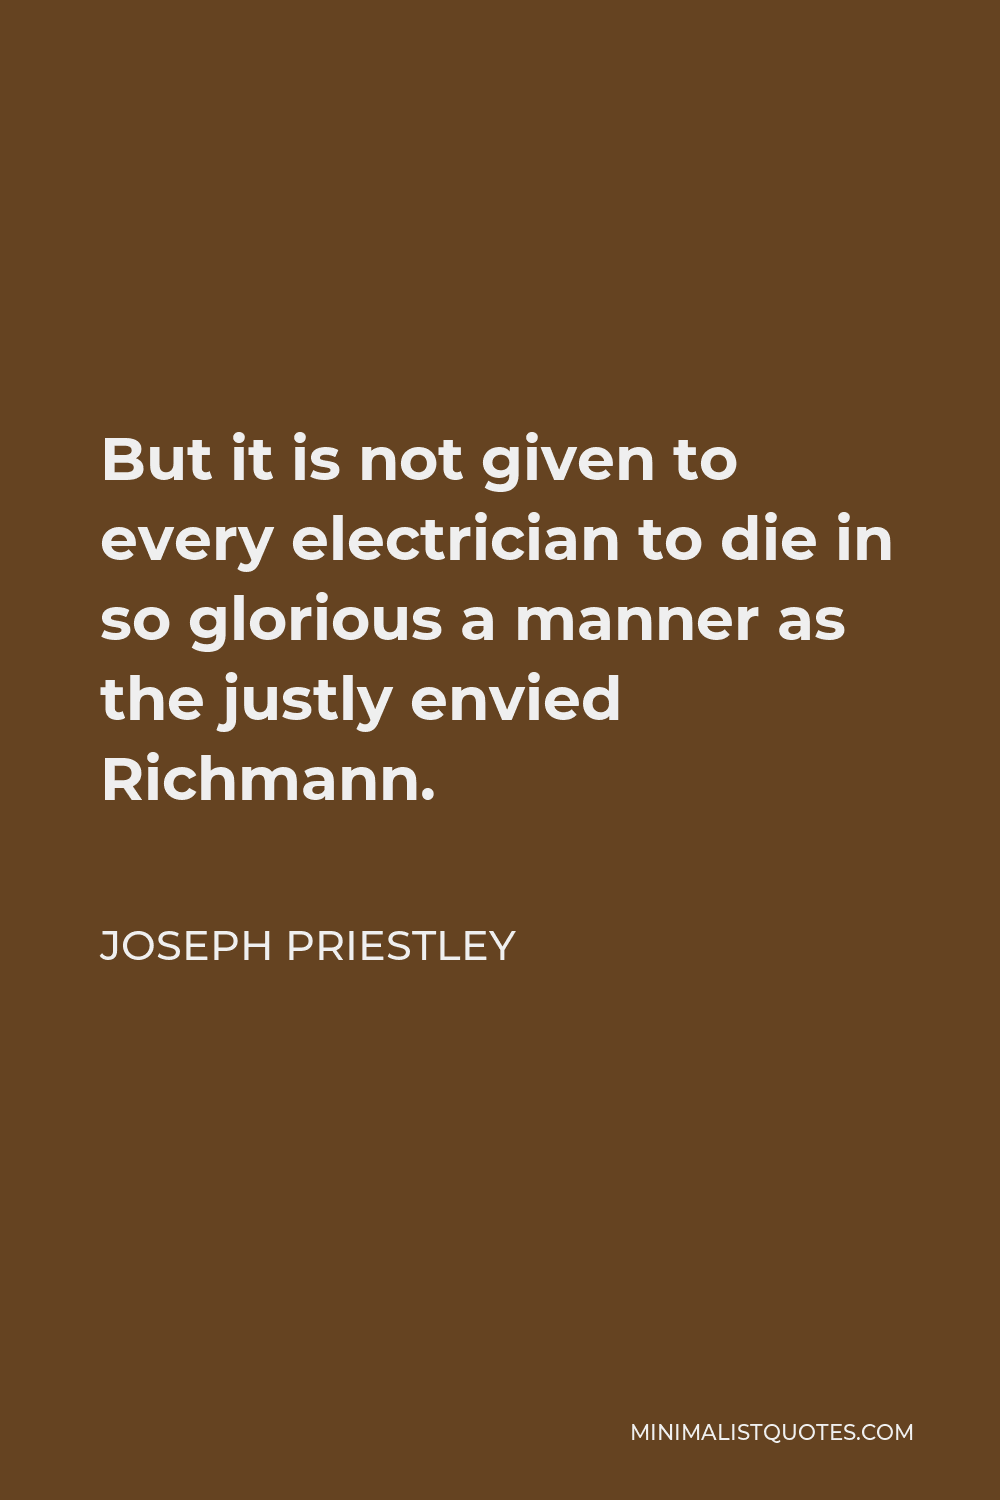 Joseph Priestley Quote - But it is not given to every electrician to die in so glorious a manner as the justly envied Richmann.